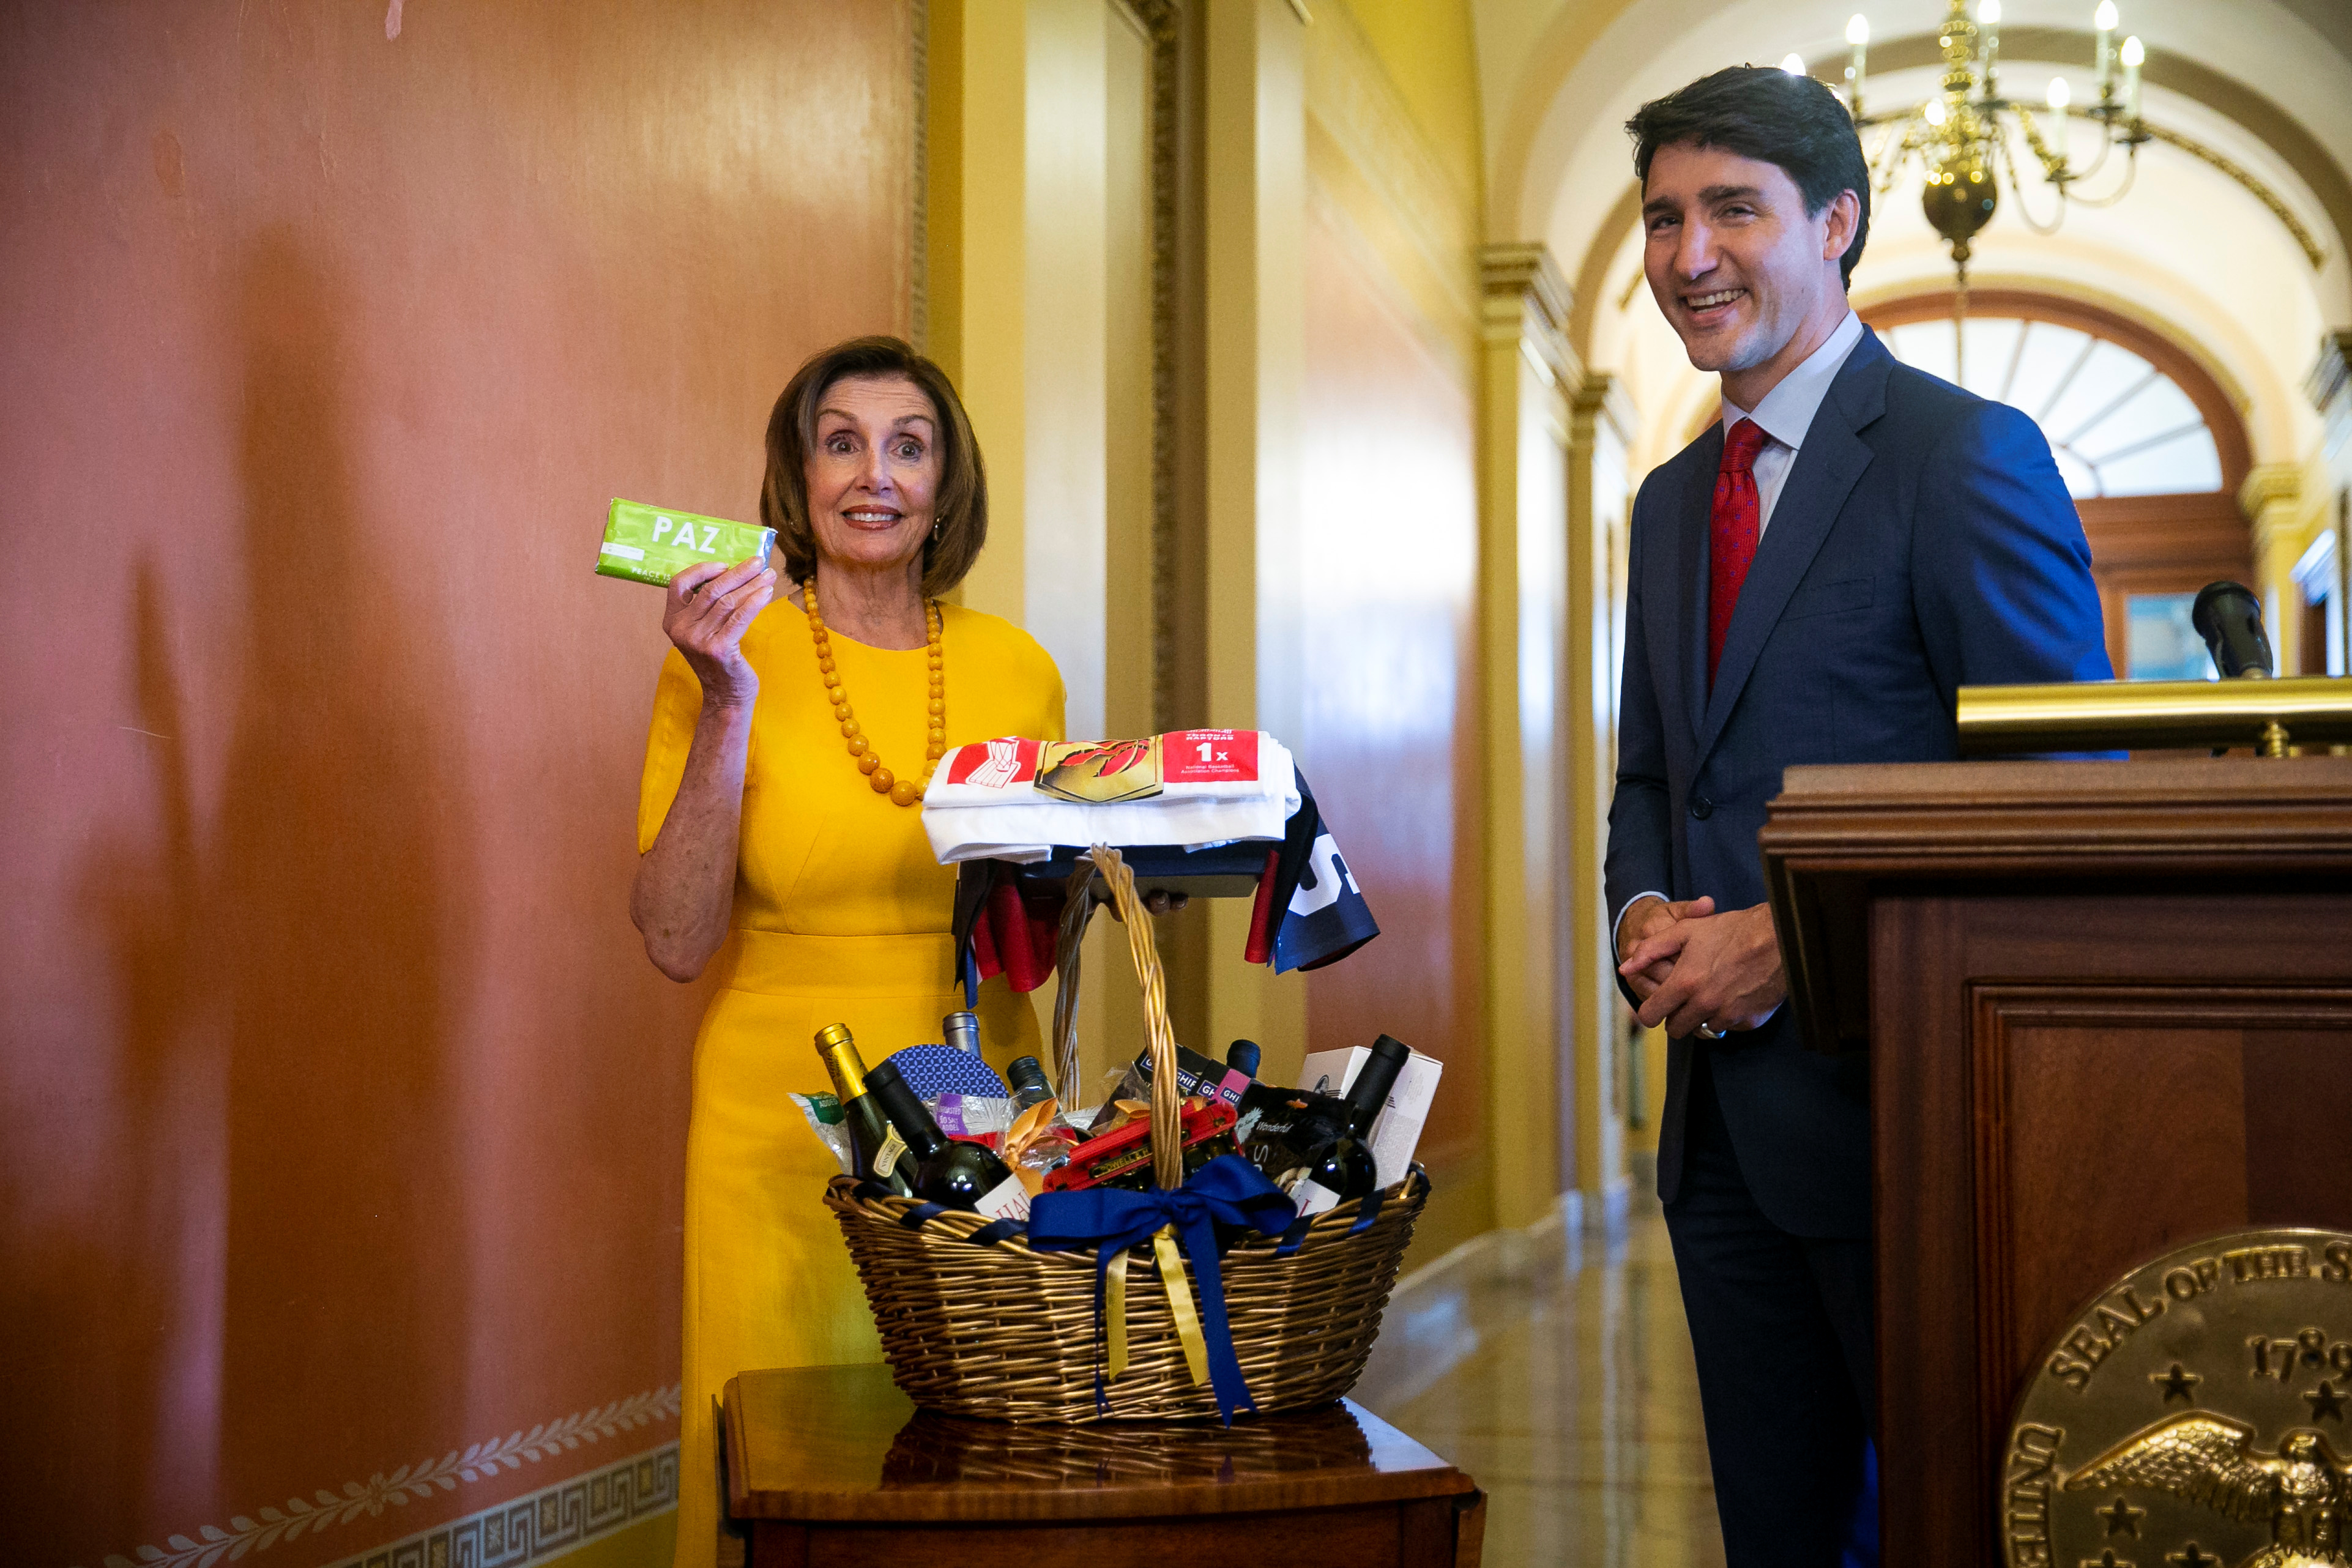 Canada's Prime Minister Justin Trudeau, hands a gift to U.S. House Speaker Nancy Pelosi (D-CA) as they settle a wager on the Toronto Raptors defeating the Golden State Warriors in the 2019 NBA Finals, on Capitol Hill in Washington, U.S. June 20, 2019. REUTERS/Al Drago 